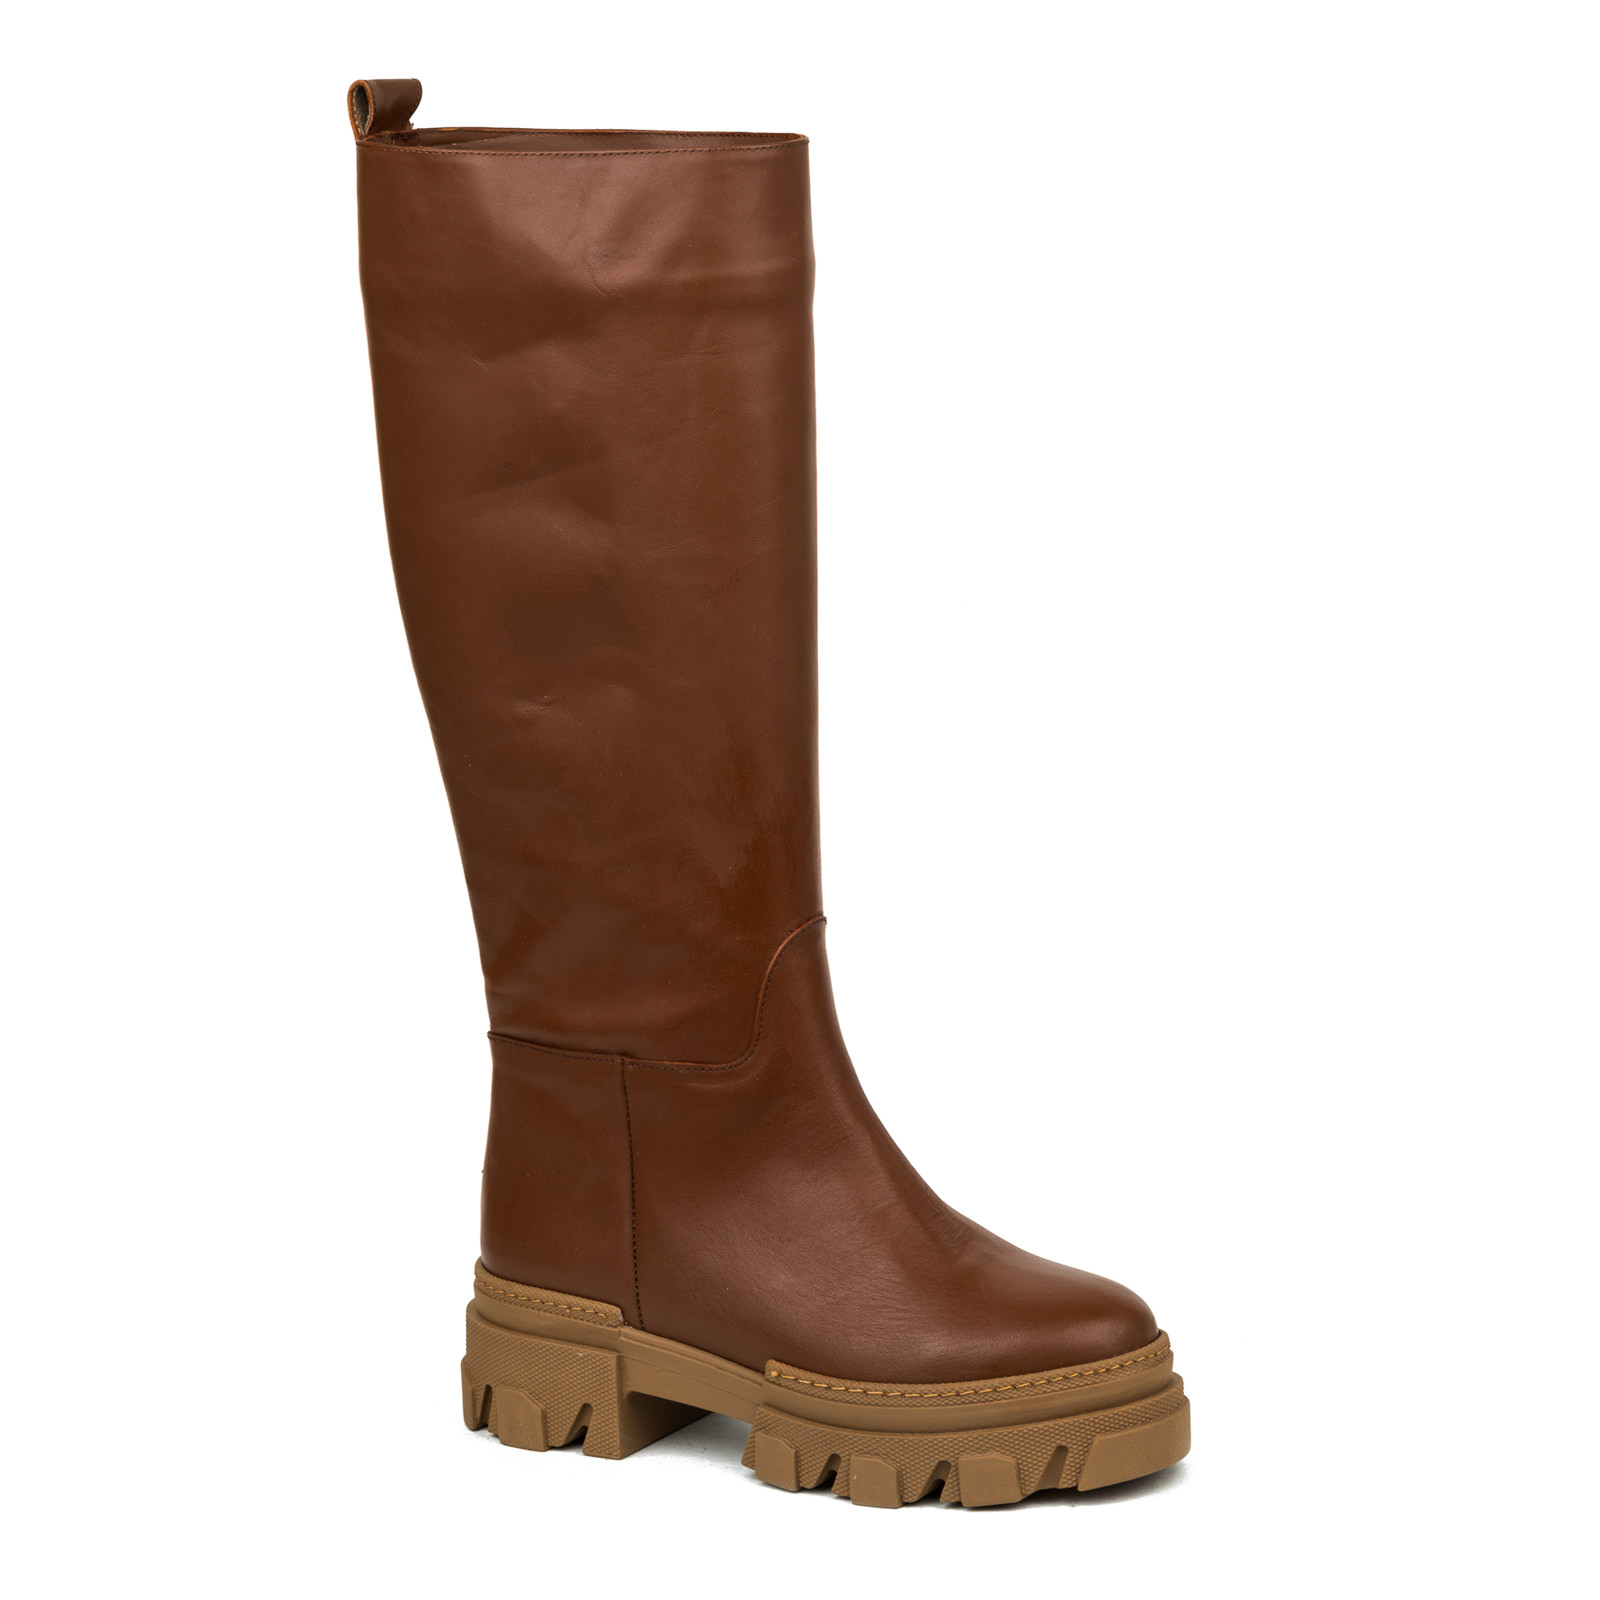 Leather WATERPROOF boots B128 - BROWN